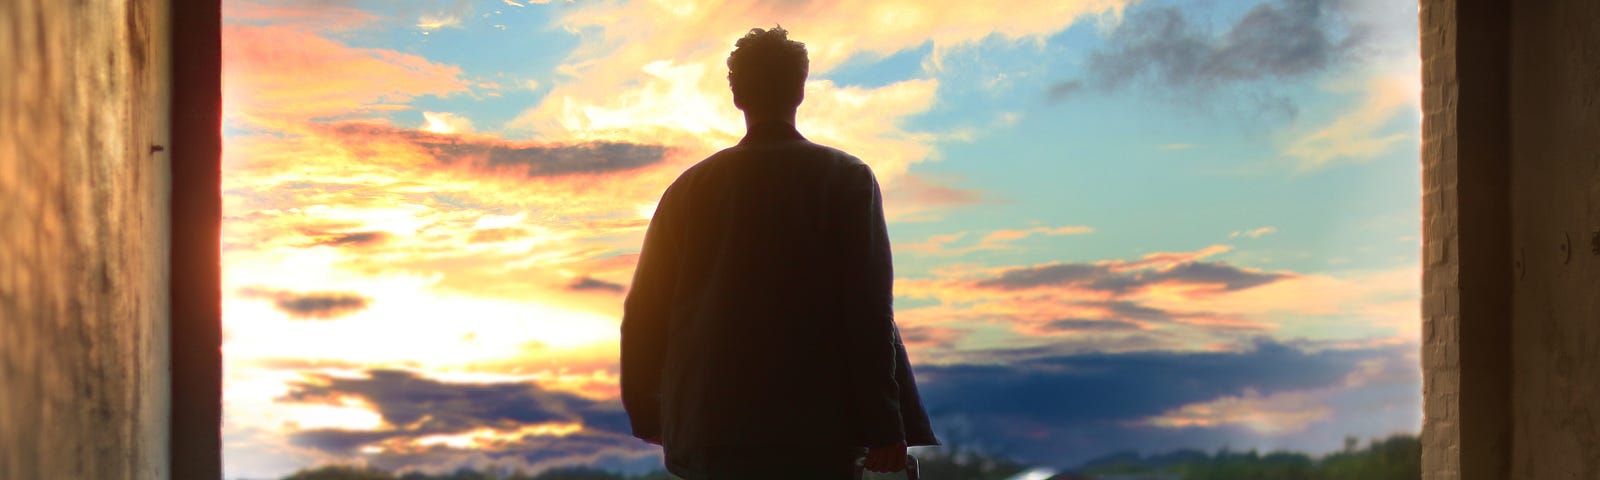 man stood with a suitcase looking out at a beautiful sunset